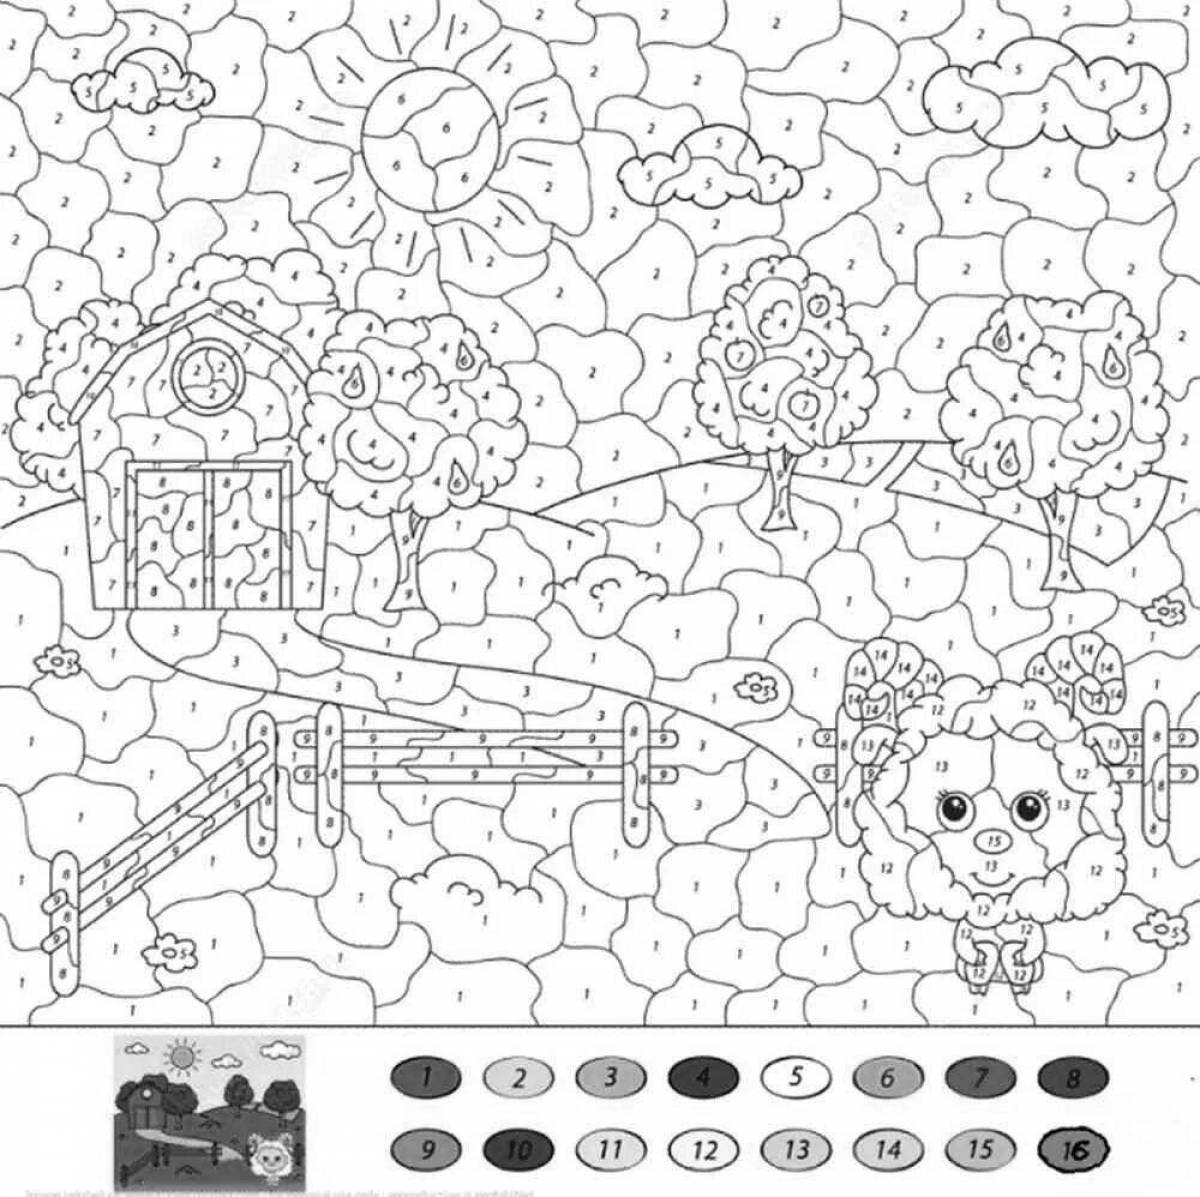 Wonderful coloring game by numbers without internet